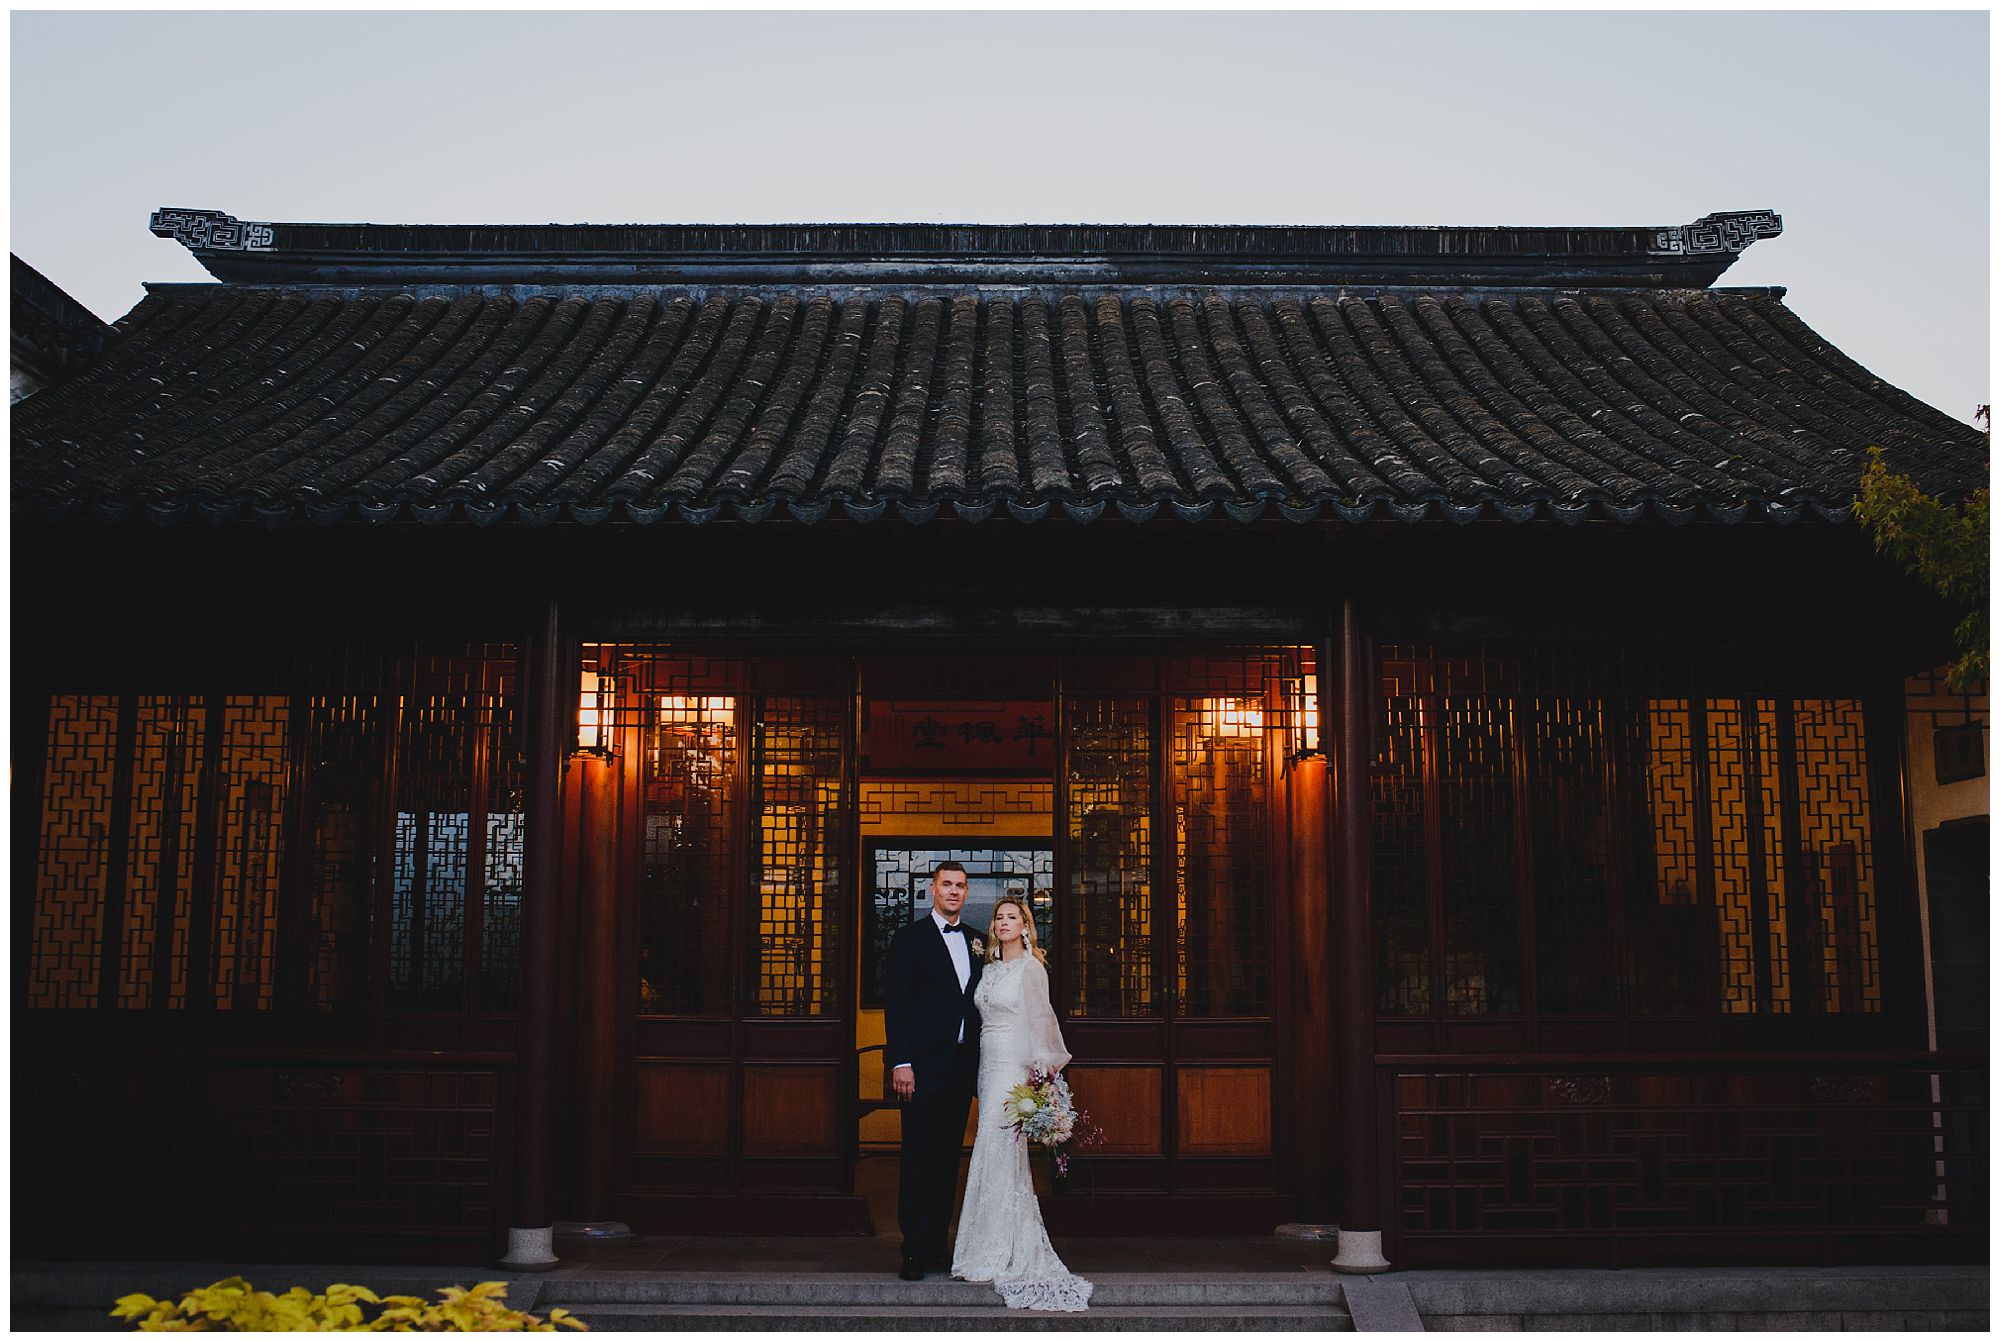 stylish bride and groom at sunset after their wedding ceremony at Dr. Sun Yat-Sen Classical Chinese Gardens, elopement, intimate wedding, candid wedding photography, sunset wedding photography